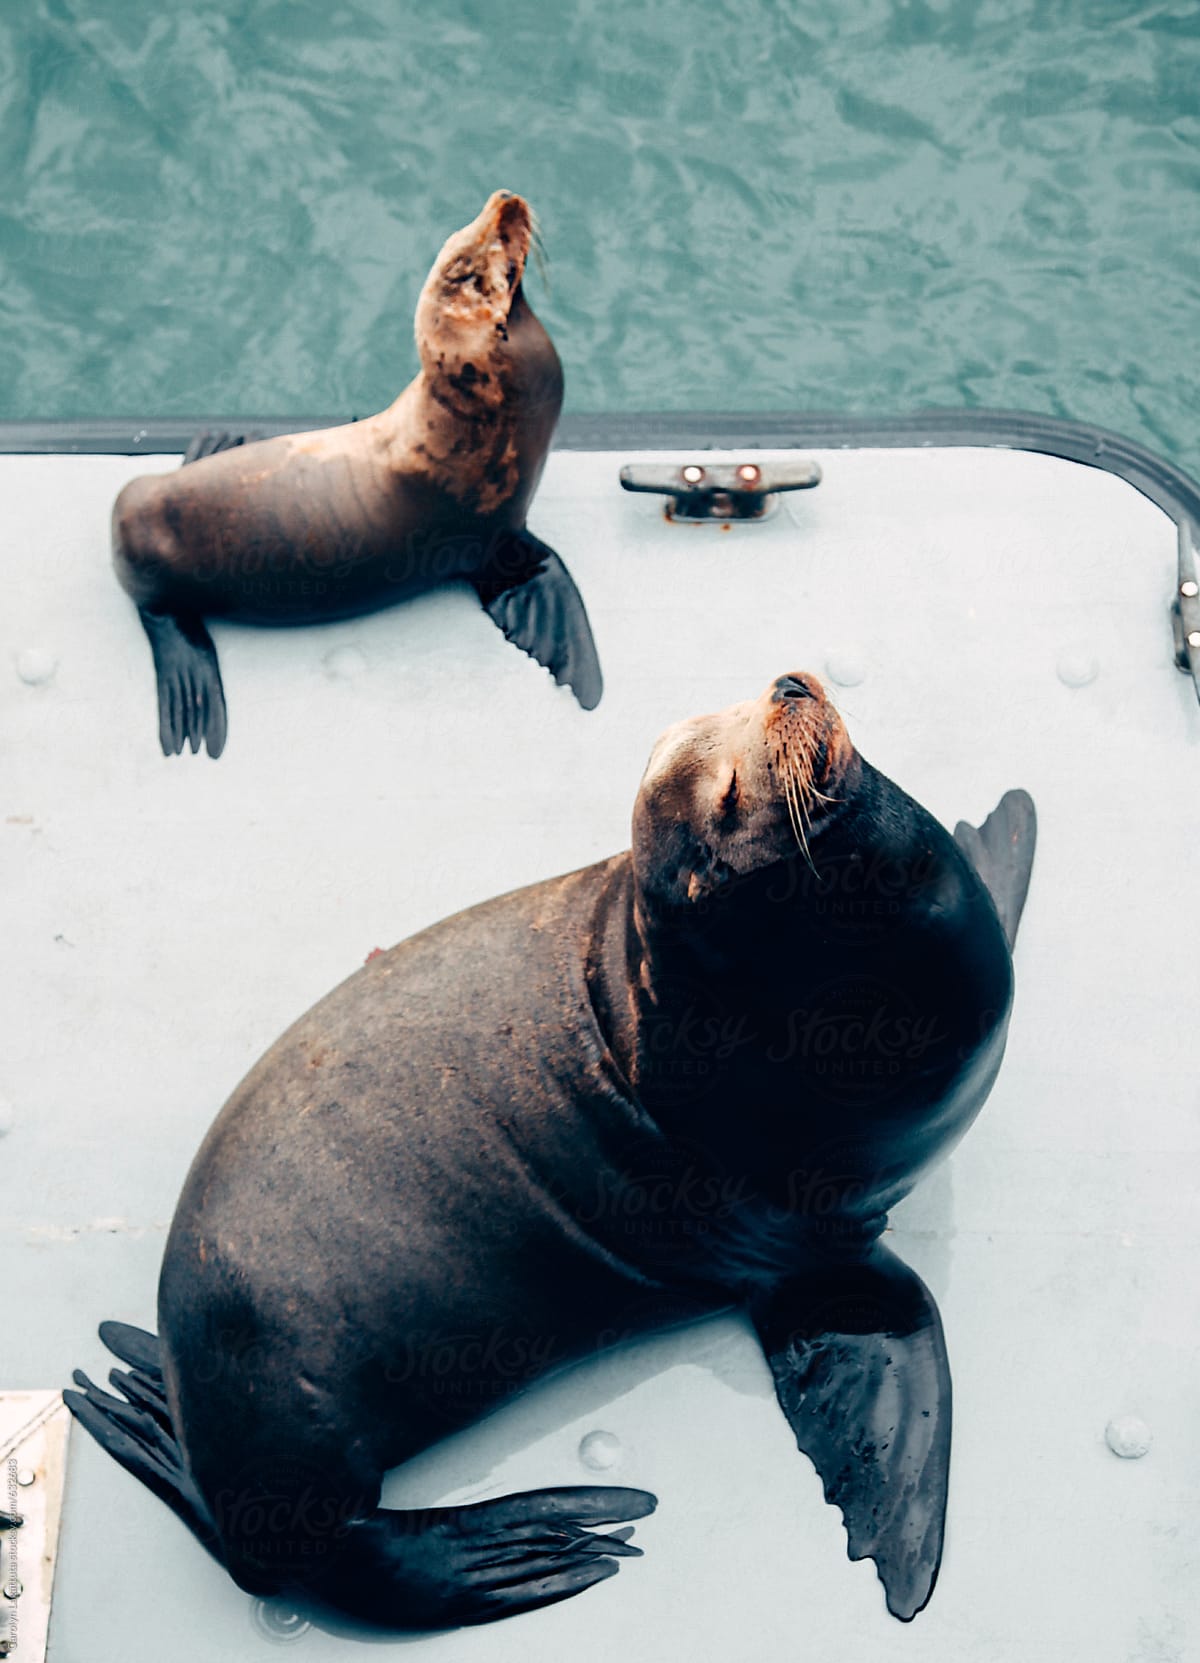 Baby and adult sea lion in the same pose - sitting on the dock by the water